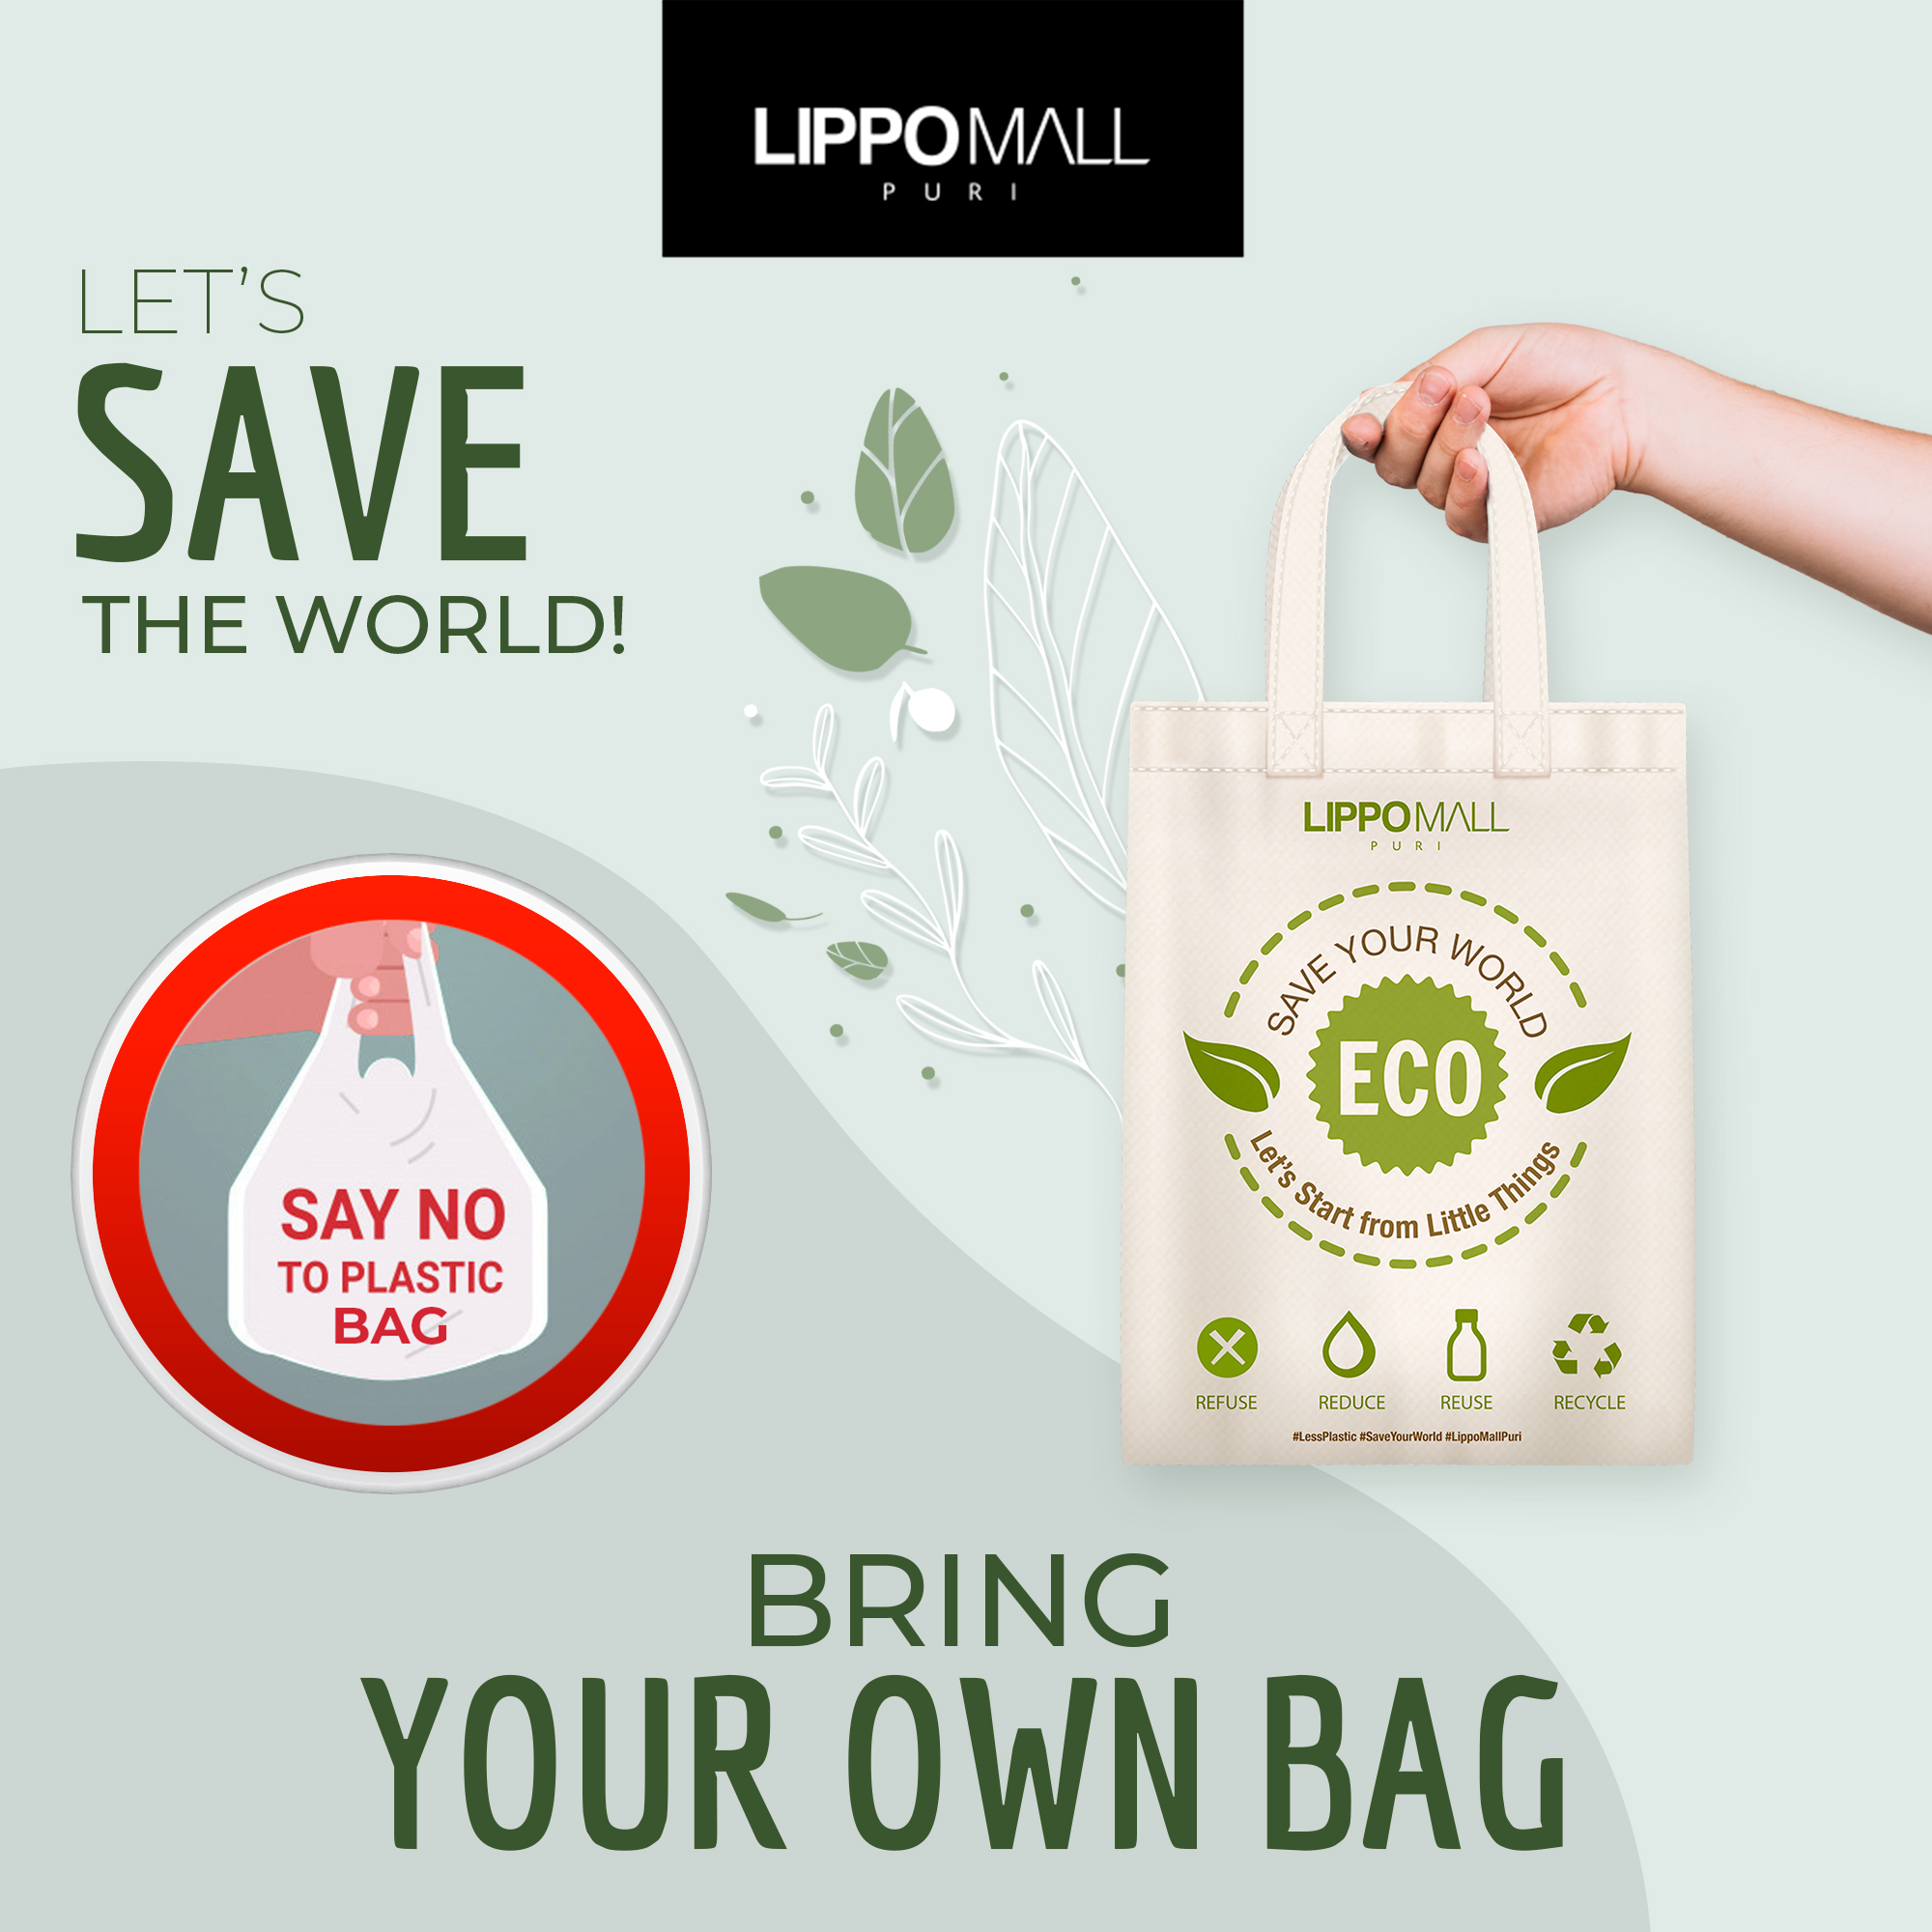 Bring your own bag in lippo mall puri st. moritz